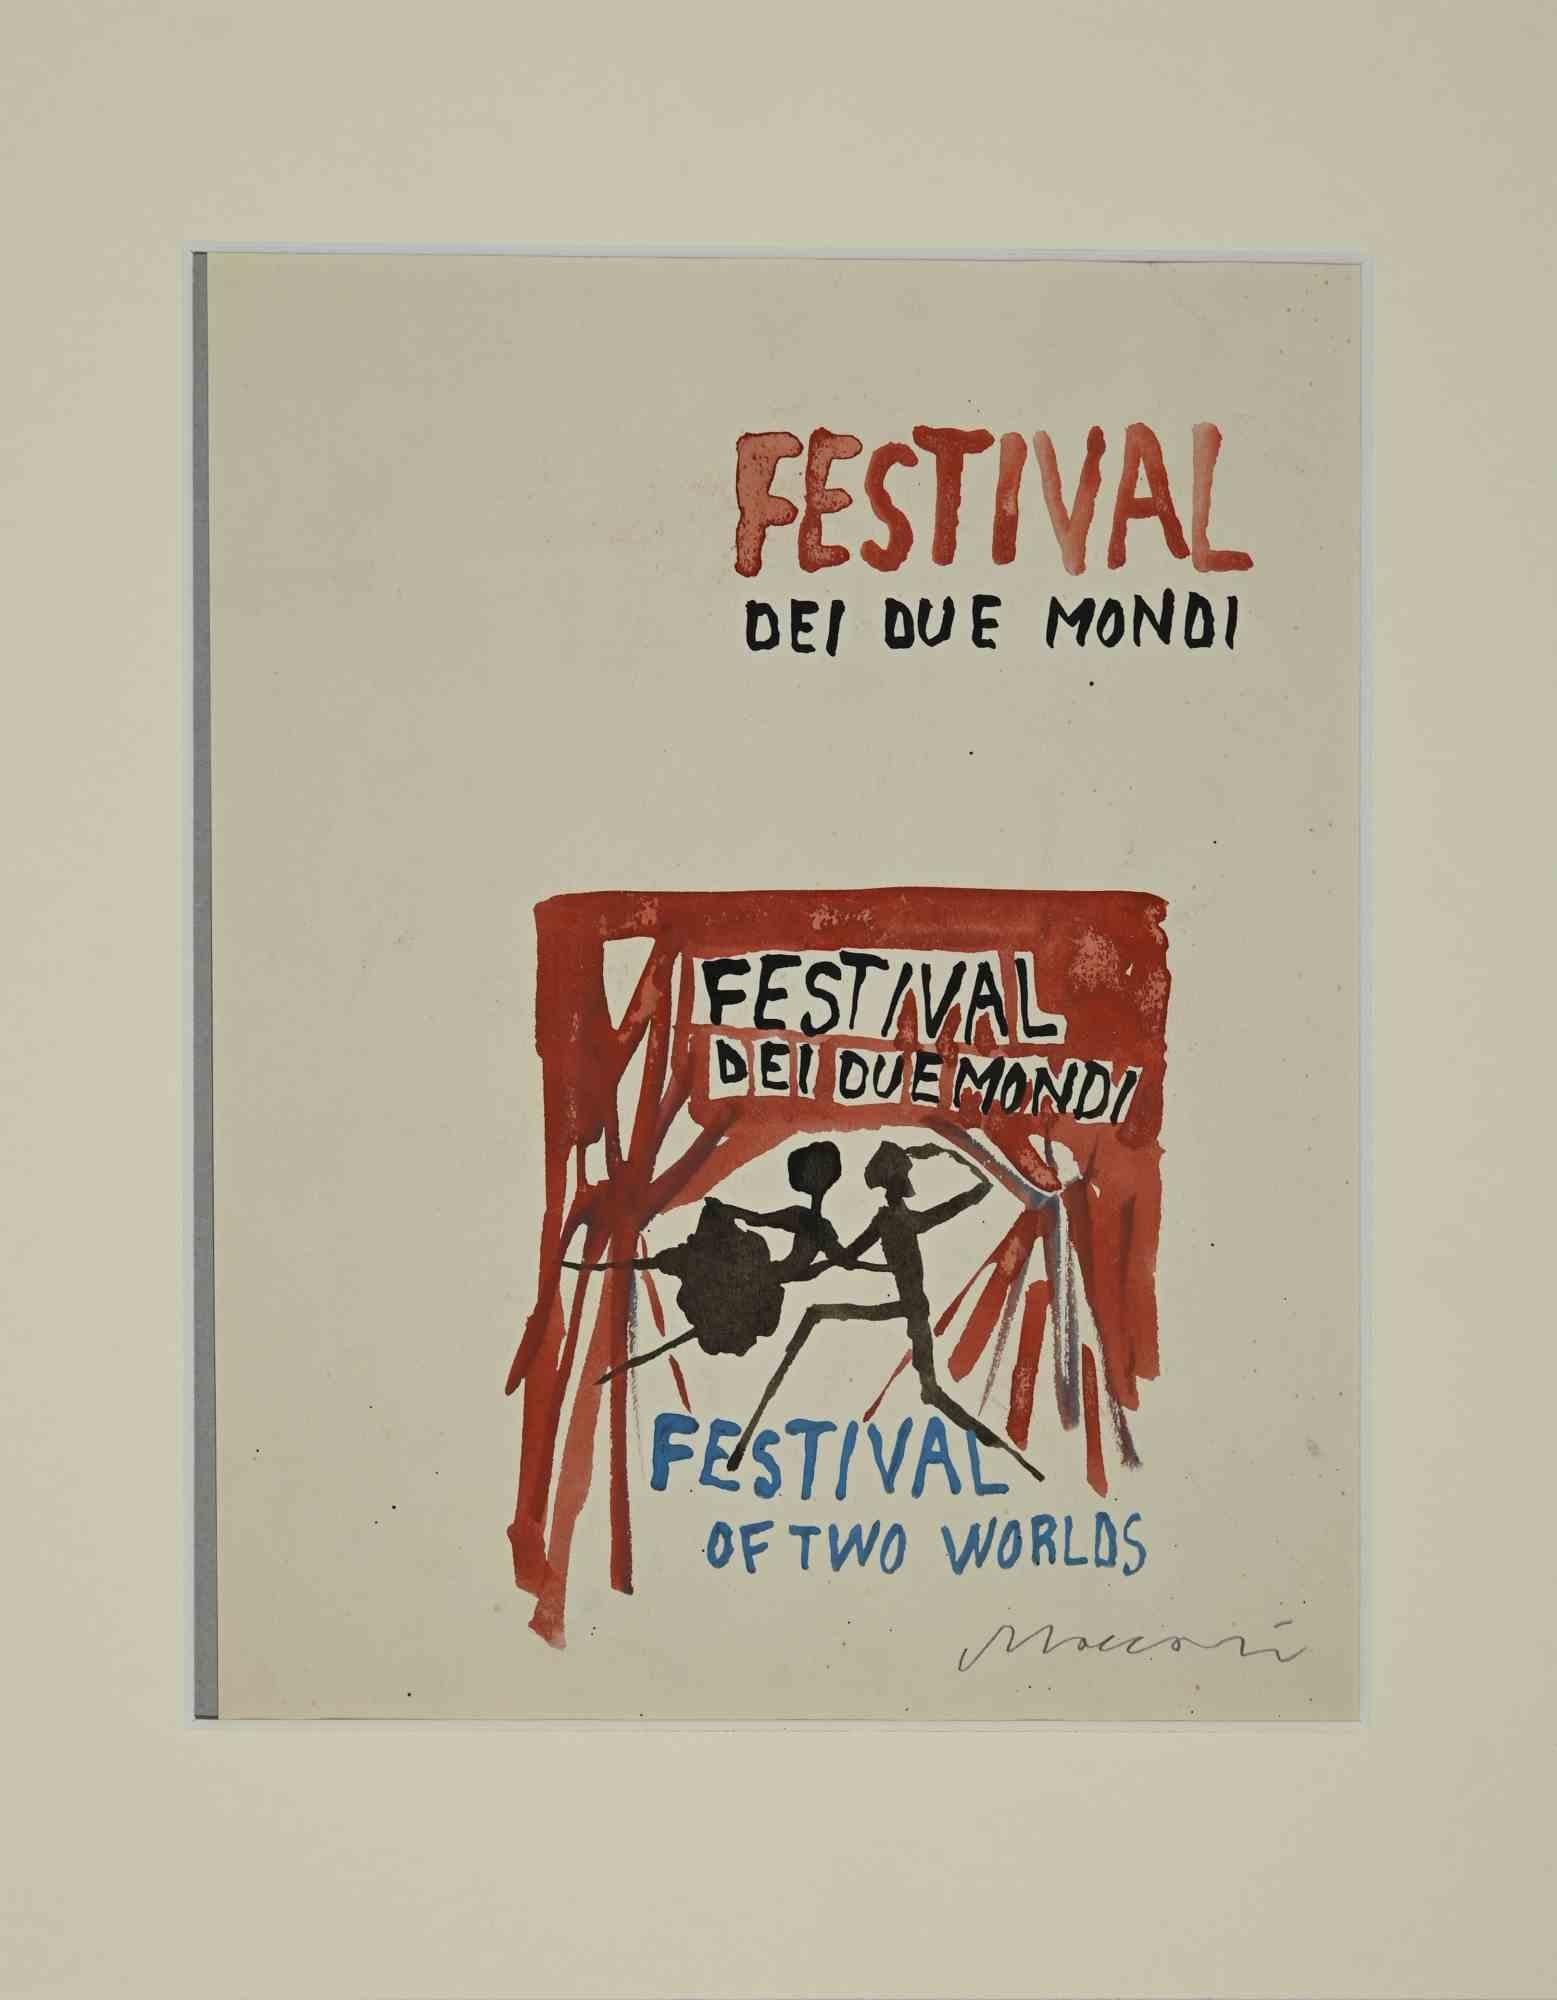 Festival of two worlds is an artwork realized by Mino Maccari, in 1960s. 

Watercolour, draft number 195. 

Handsigned in pencil, lower right margin.

35 x 28 cm, it includes passepartout. 

Very good condition.

